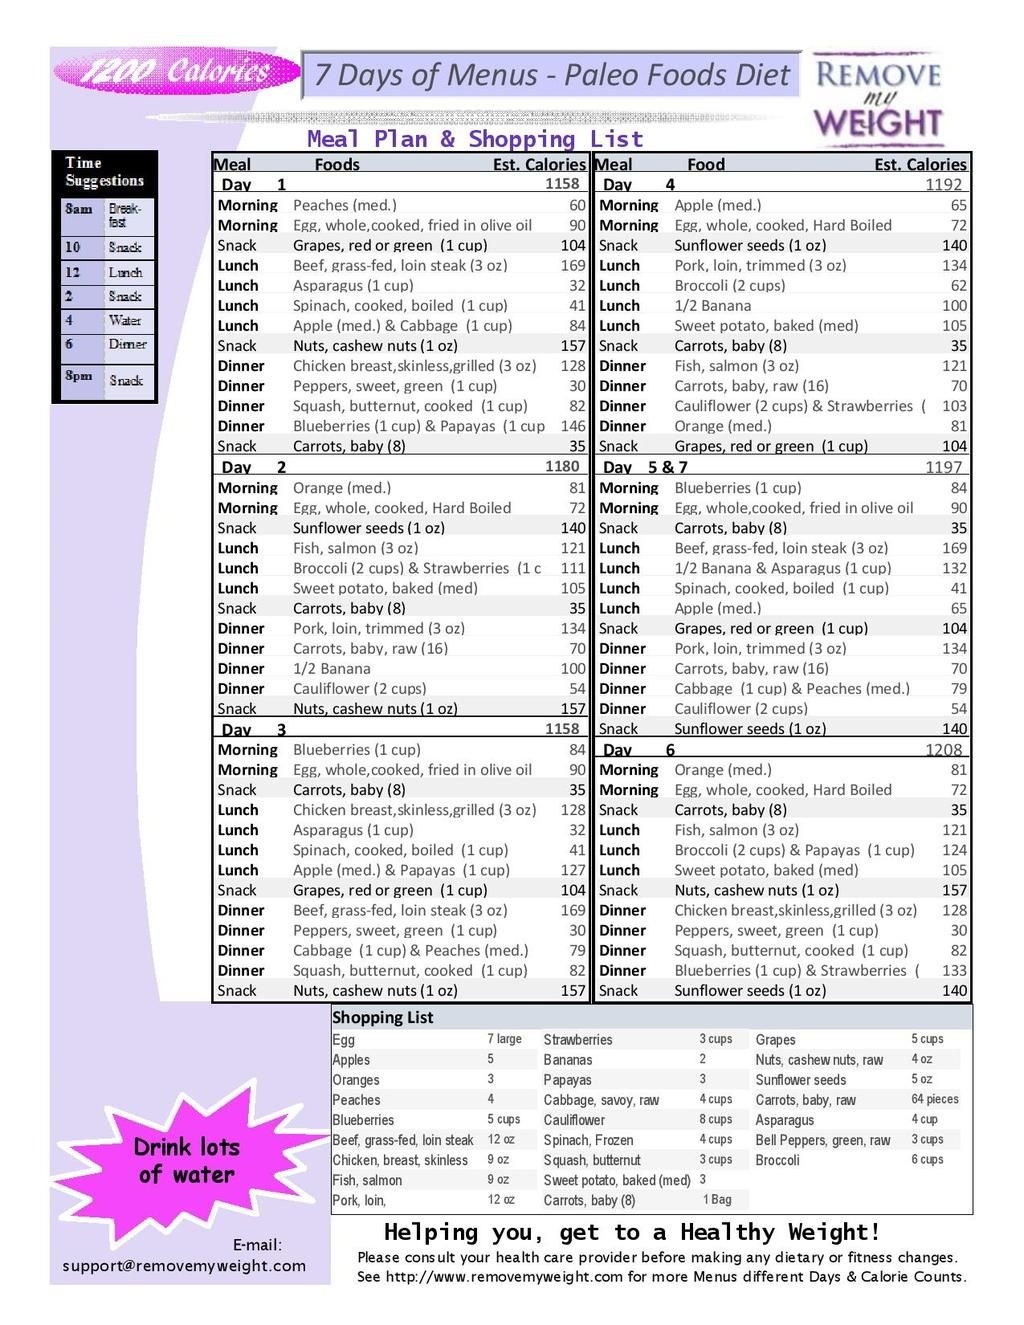 1200 Calorie A Day, Paleo Diet, 7 Day Menu And Shopping List In 2019 - Free Printable 1200 Calorie Diet Menu